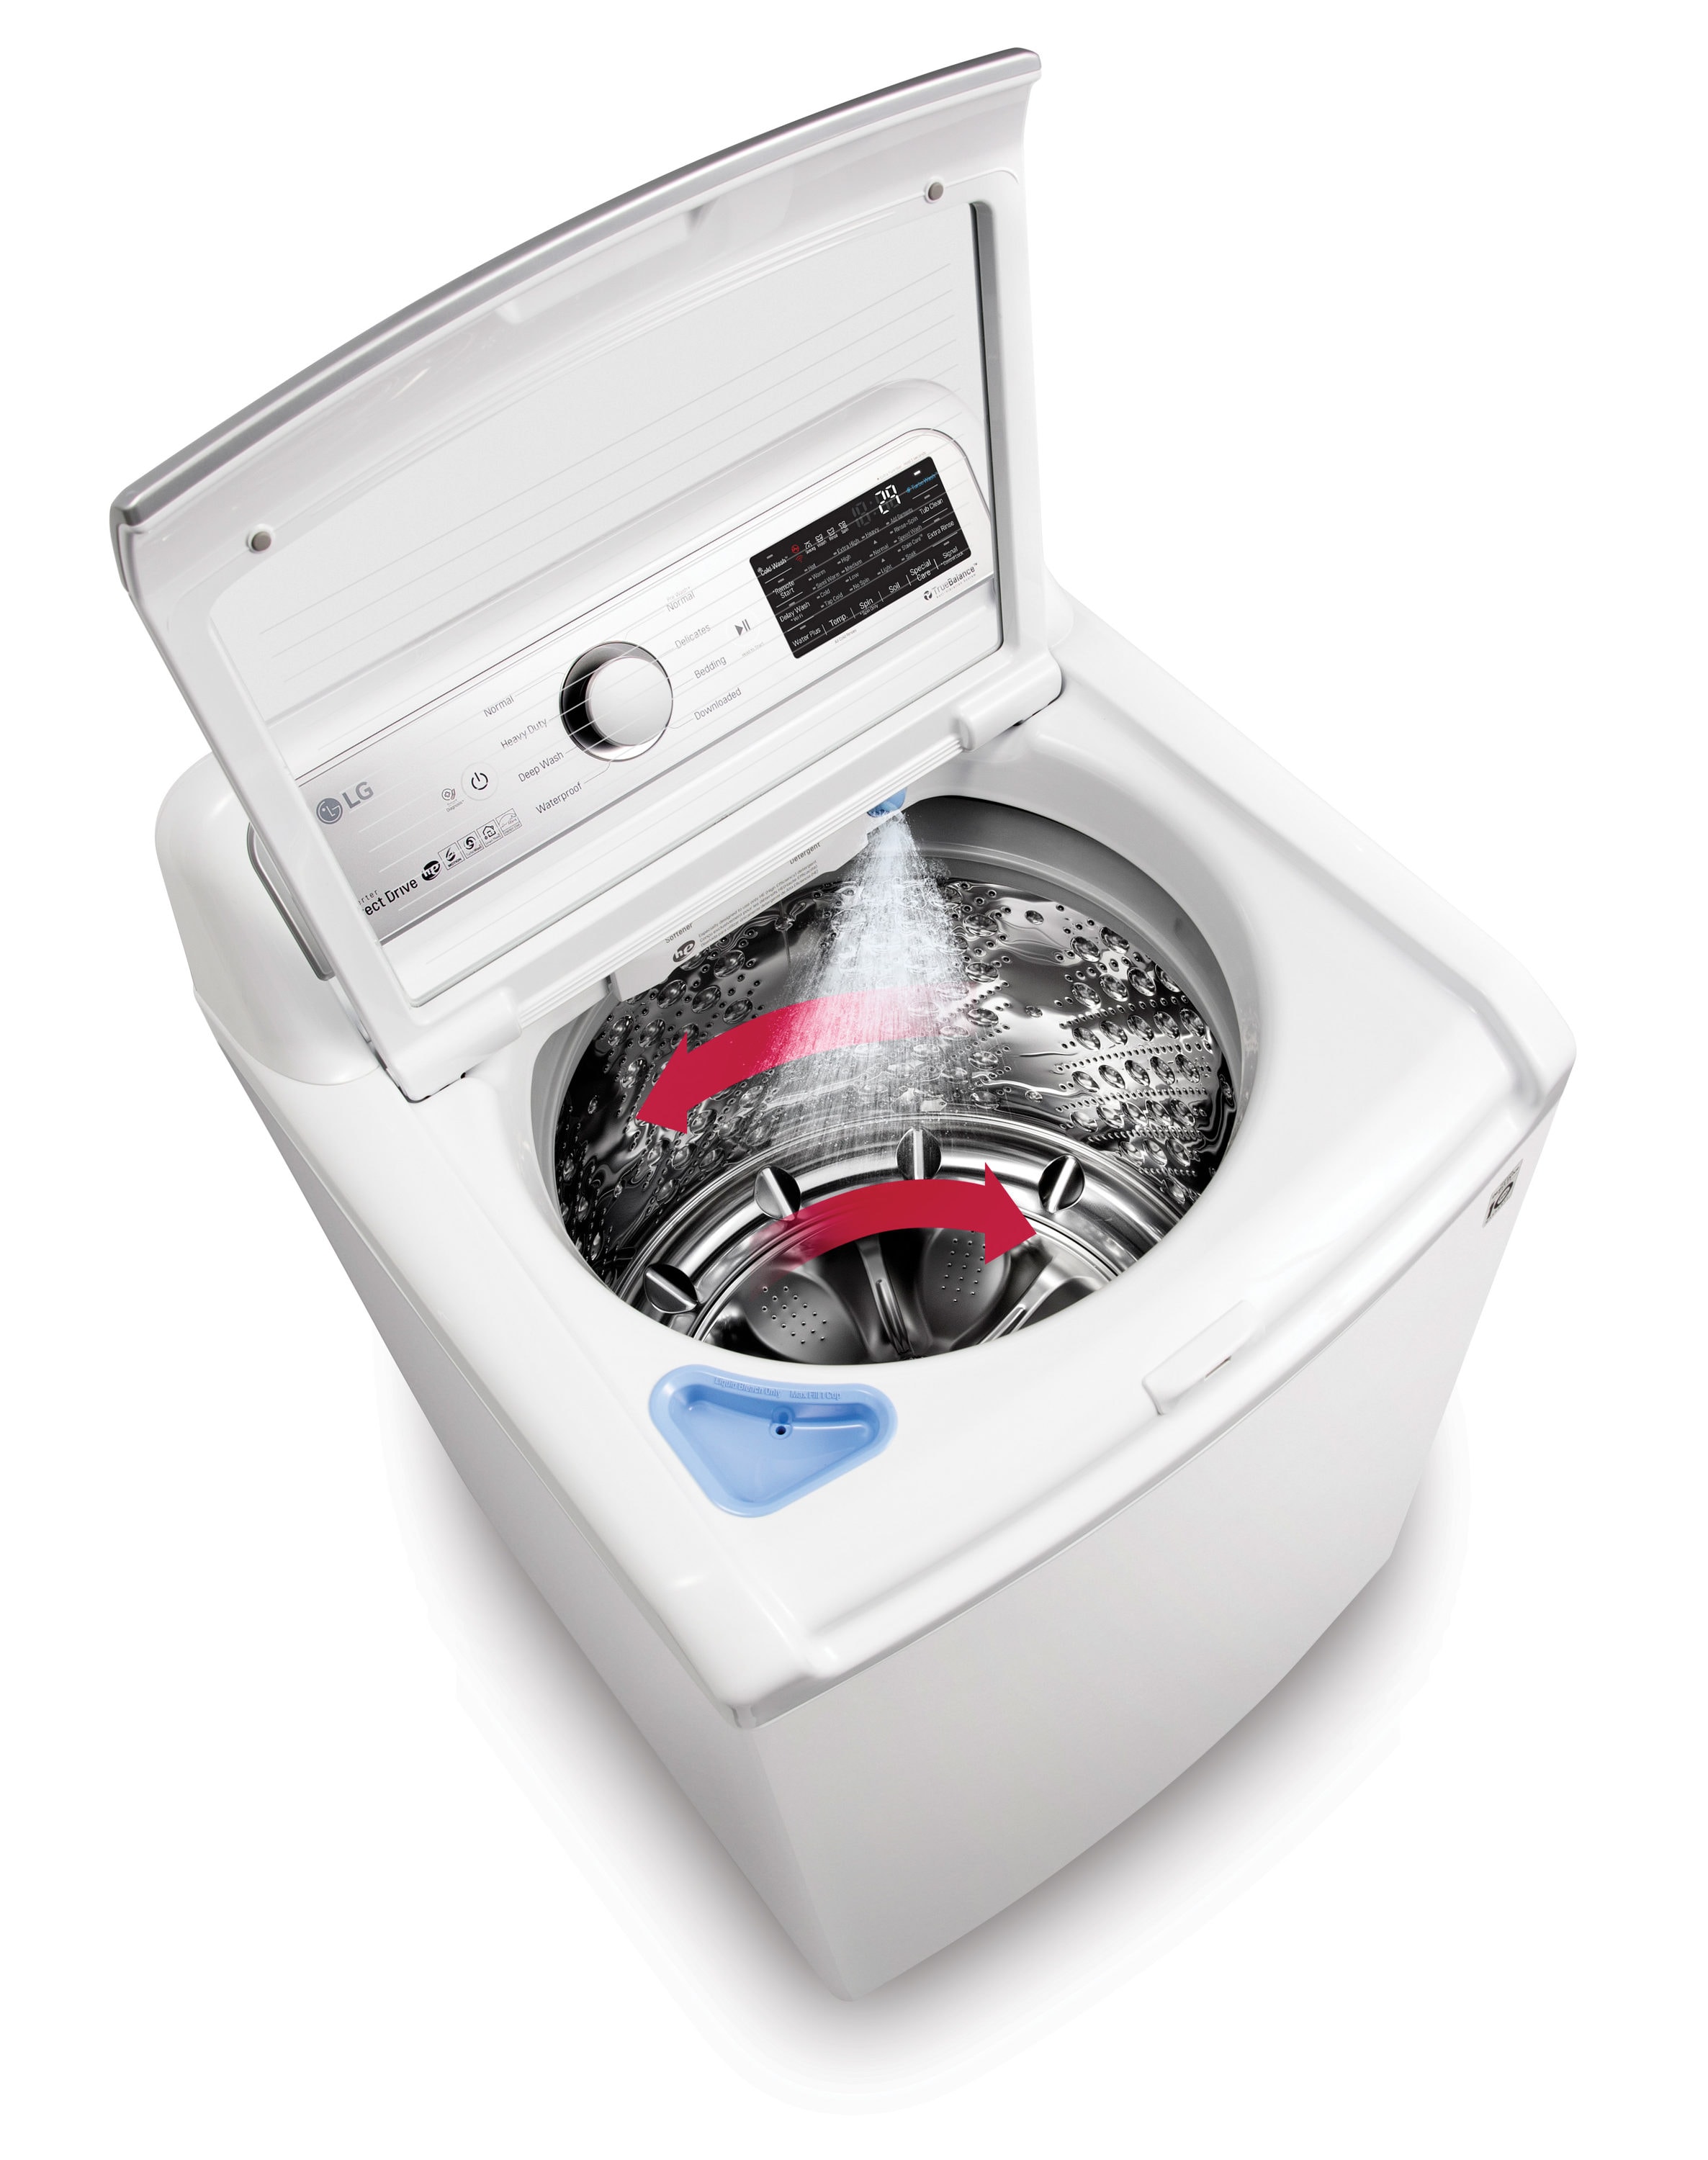 LG Top Load Washer] General Maintenance For An LG Top Load Washing Machine  